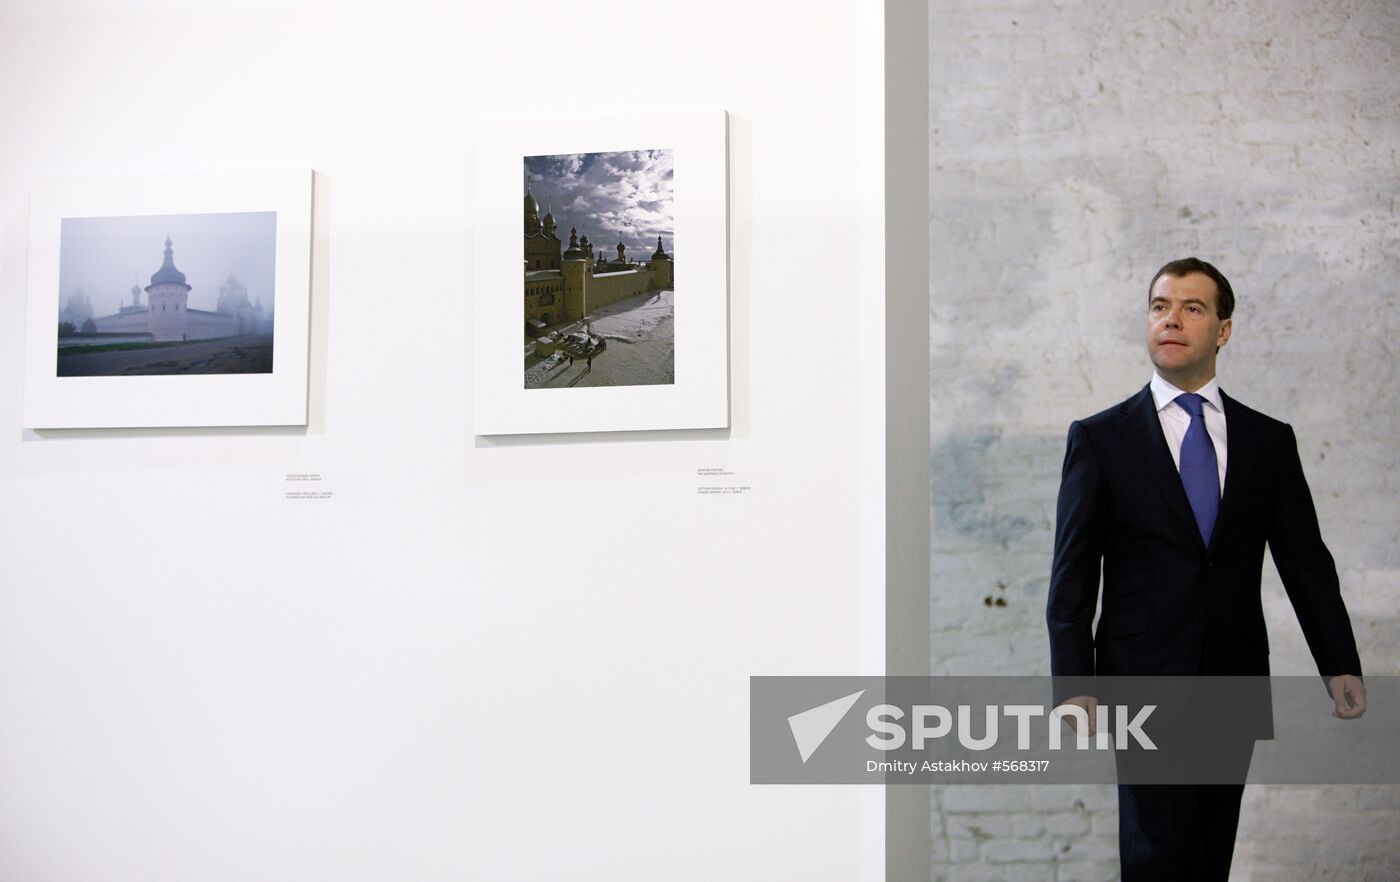 President Medvedev at Best of Russia 2009 photo exhibition